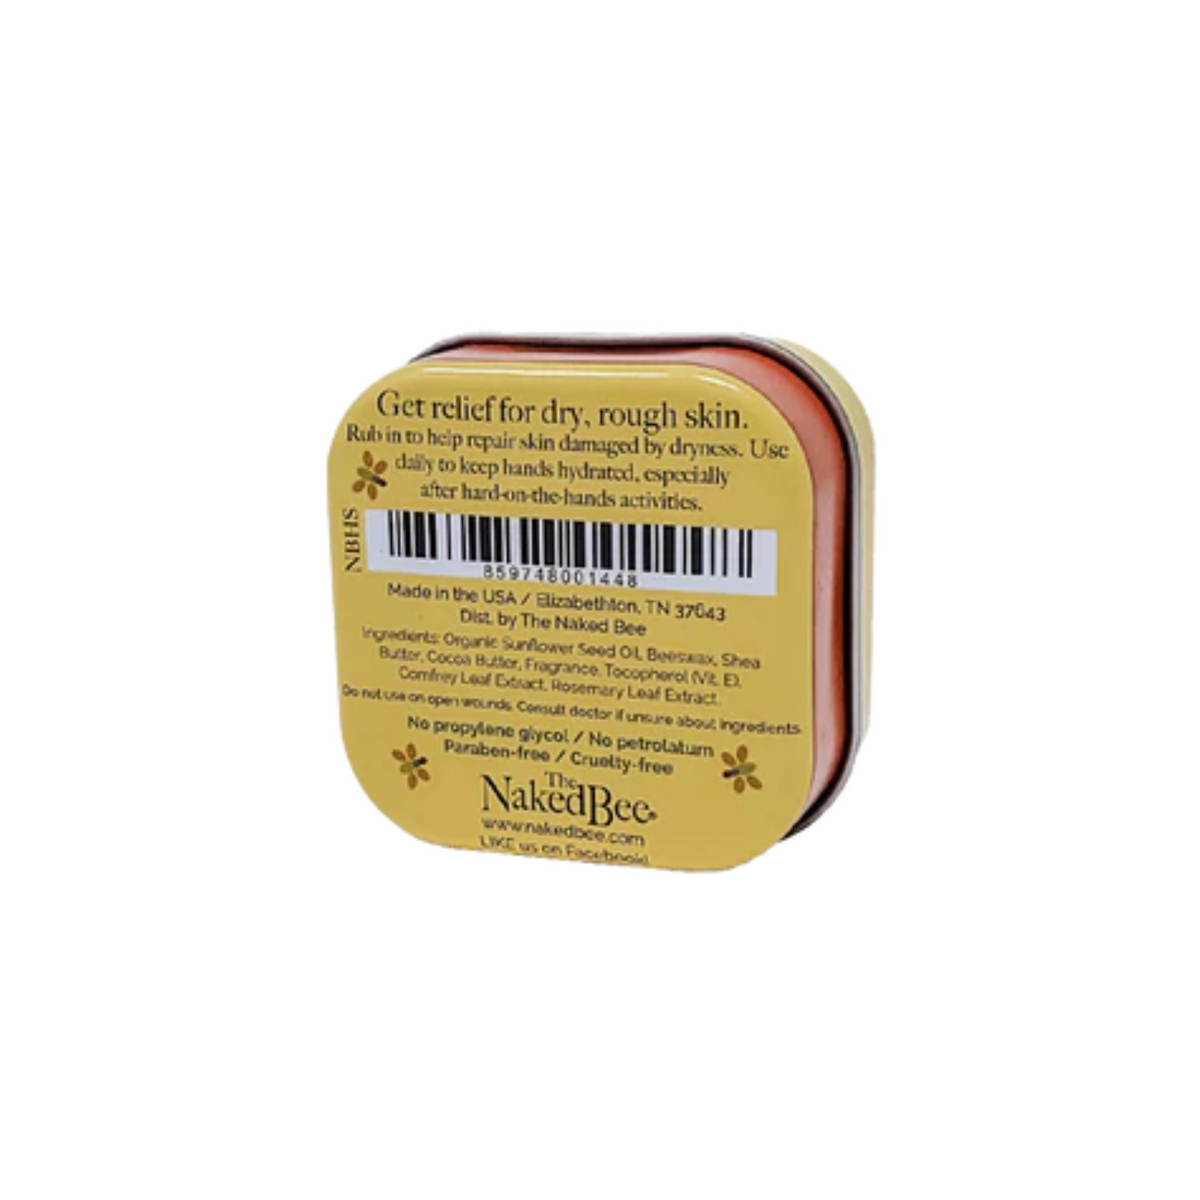 The Naked Bee Hand & Cuticle Healing Salve (2 oz) #29730